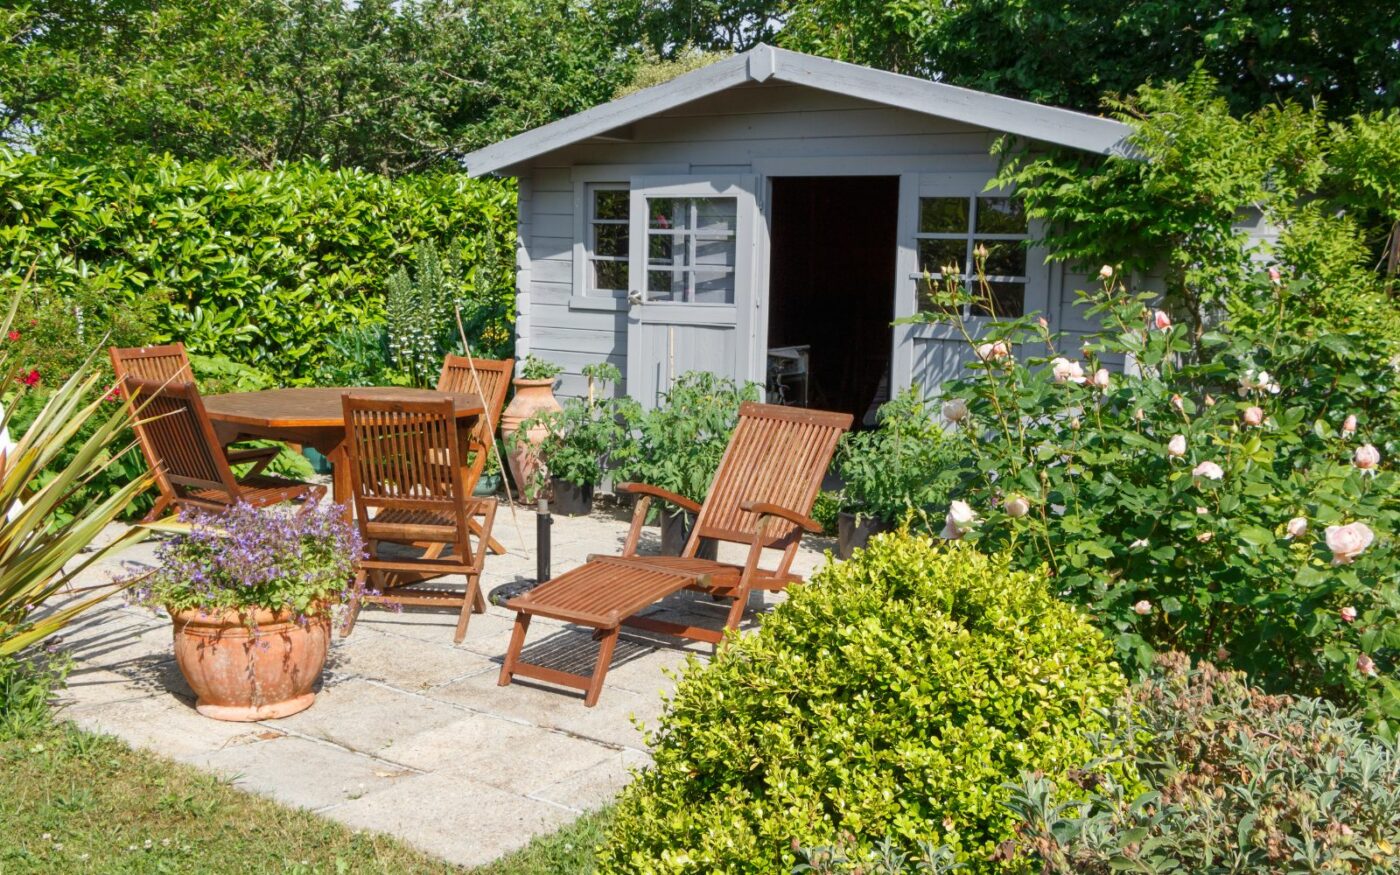 Garden Shed Ideas- Landscaping with Patio